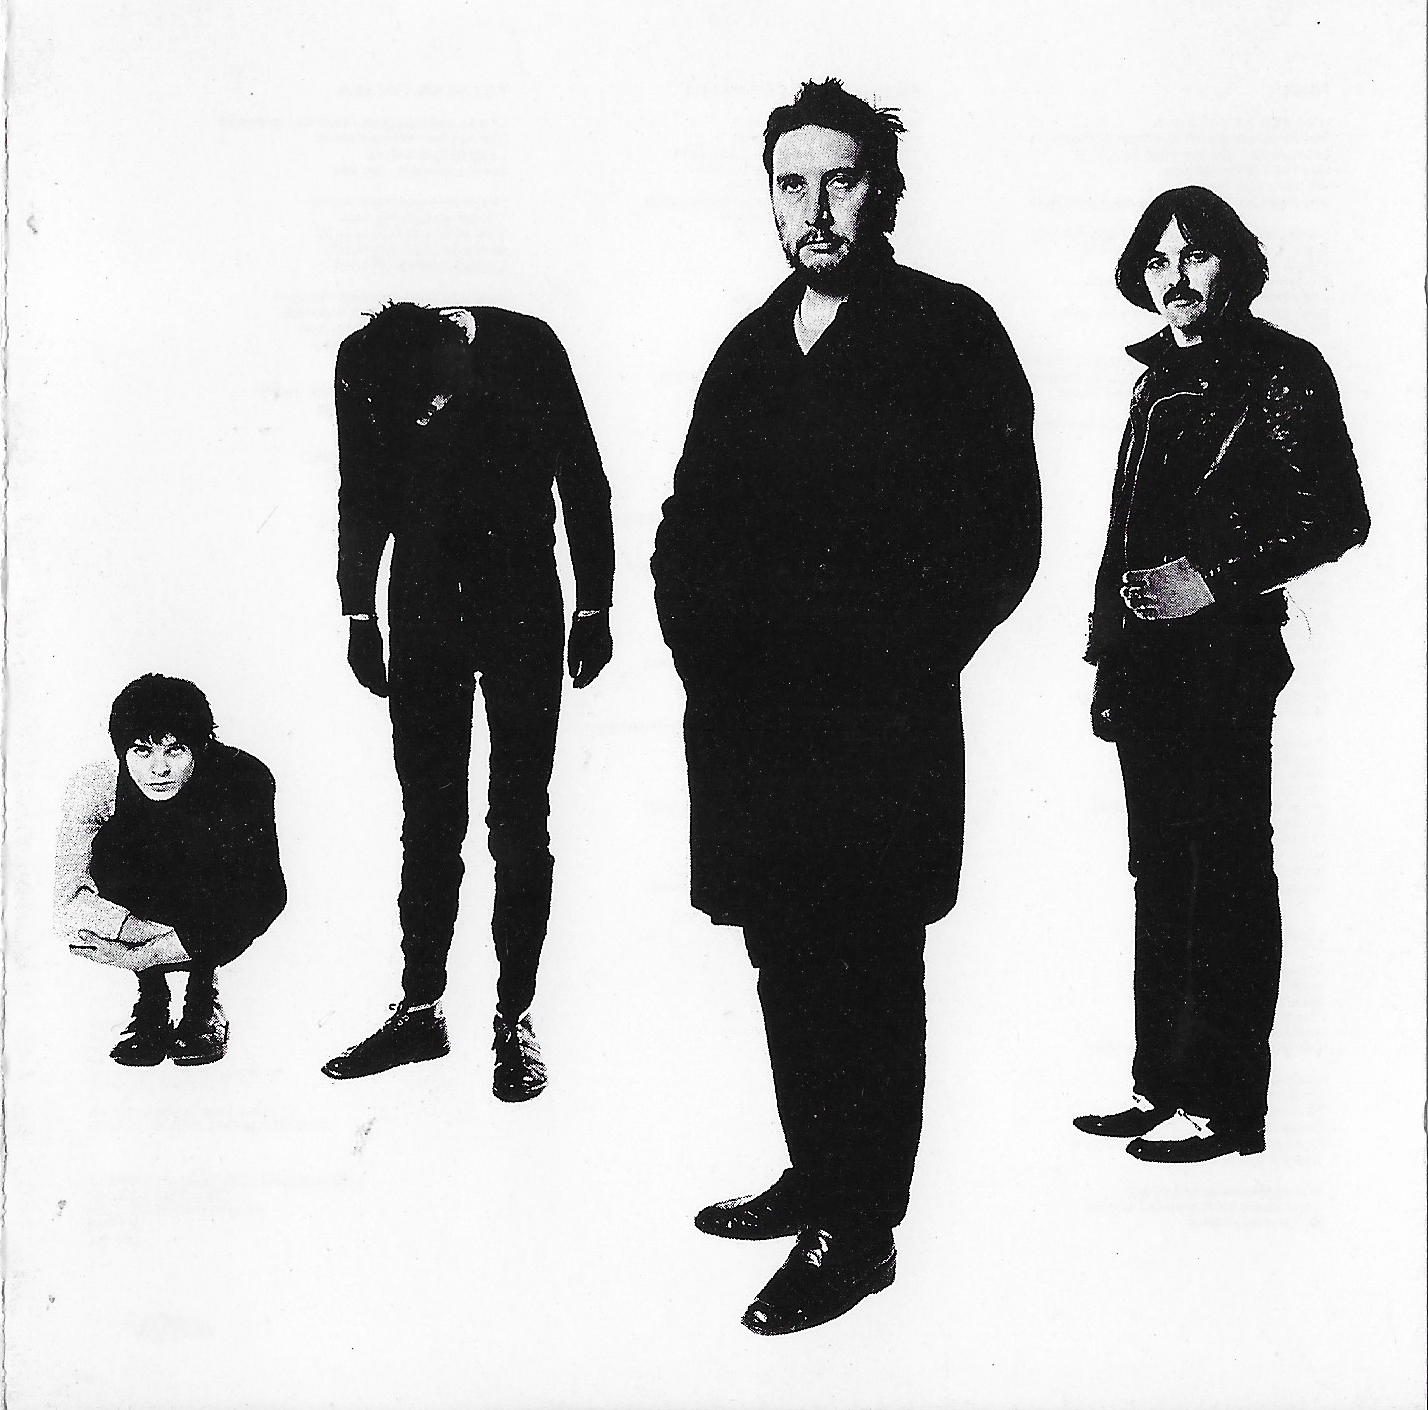 Picture of CDP 790596-2 Black and white by artist The Stranglers  from The Stranglers